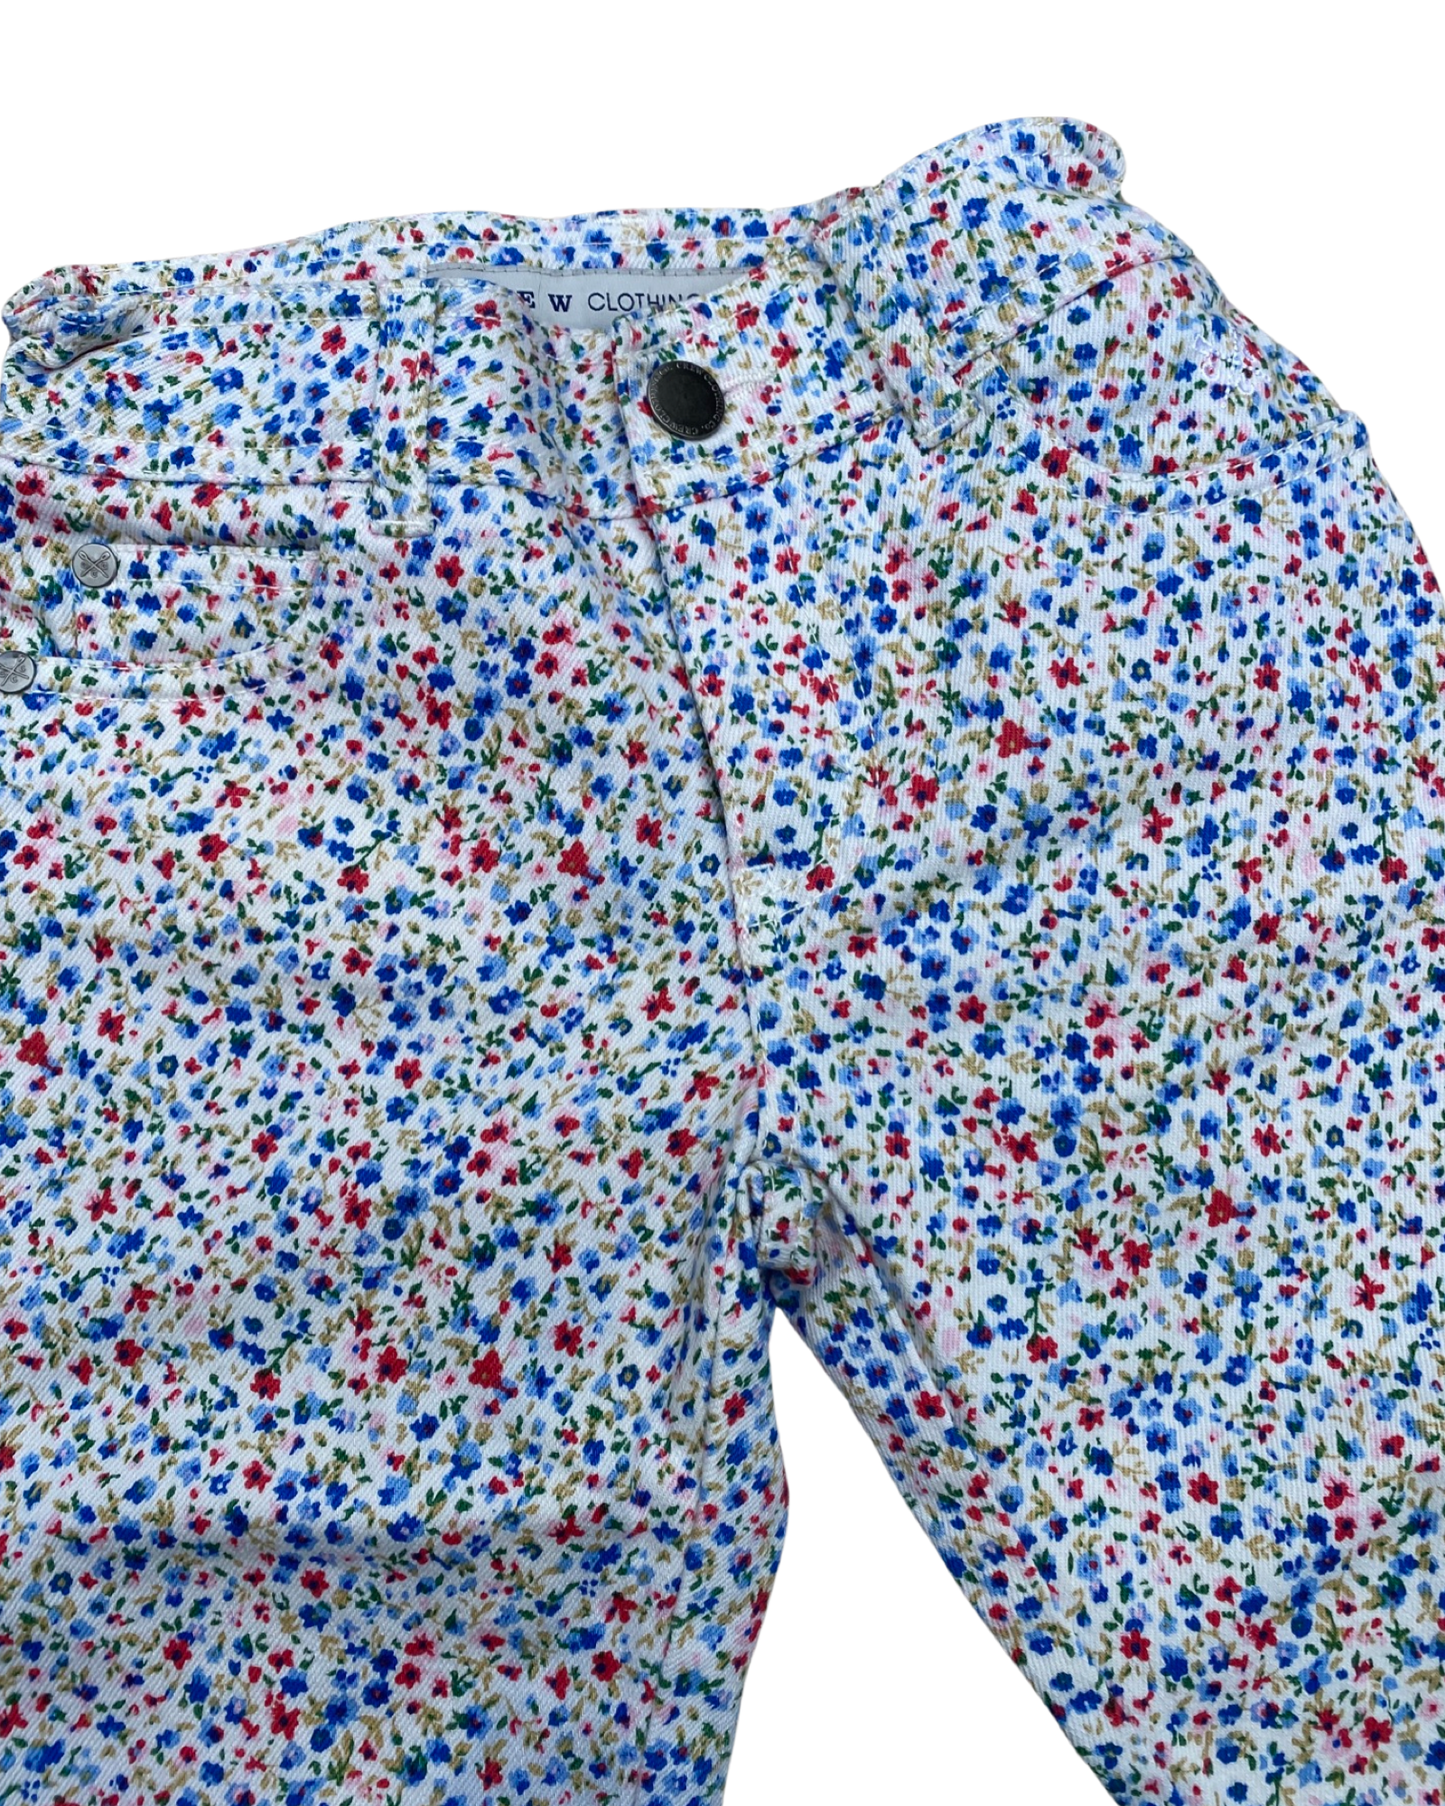 Crew clothing ditsy floral print cropped jeans (5-6yrs)